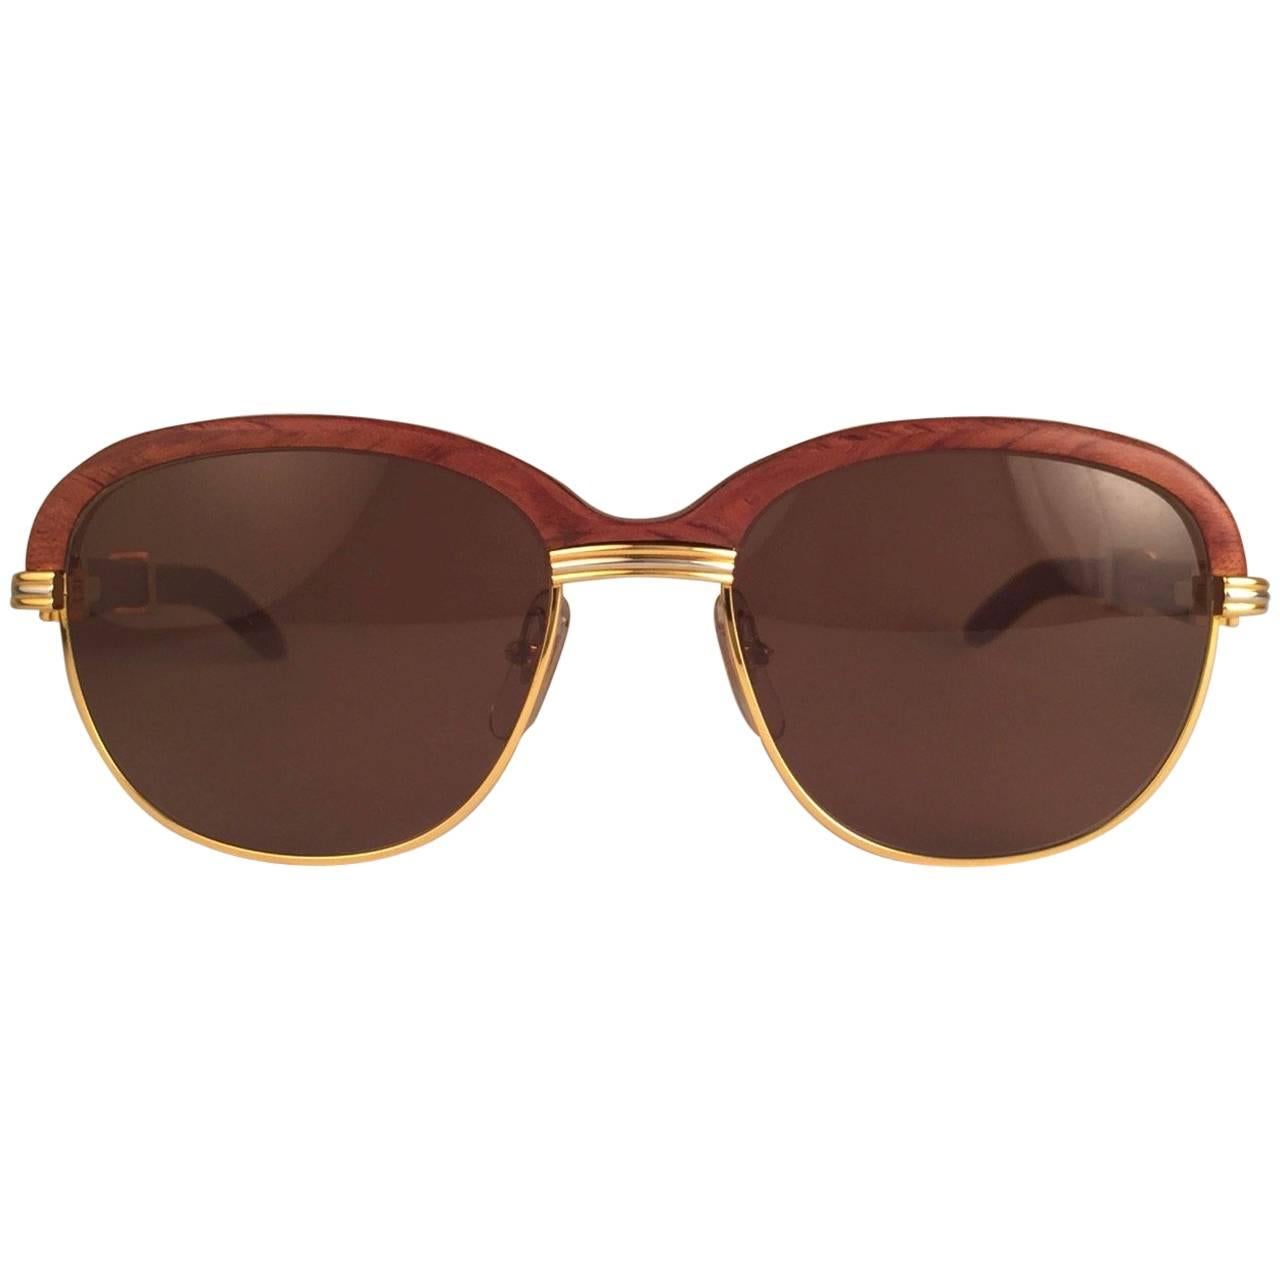 Original 1990 Cartier Malmaison Palisander hardwood sunglasses with honey brown(uv protection) lenses. 
Front and sides in yellow and white gold and has the famous wooden front. Temples are also Palisander combined with gold. 
Amazing craftsmanship!